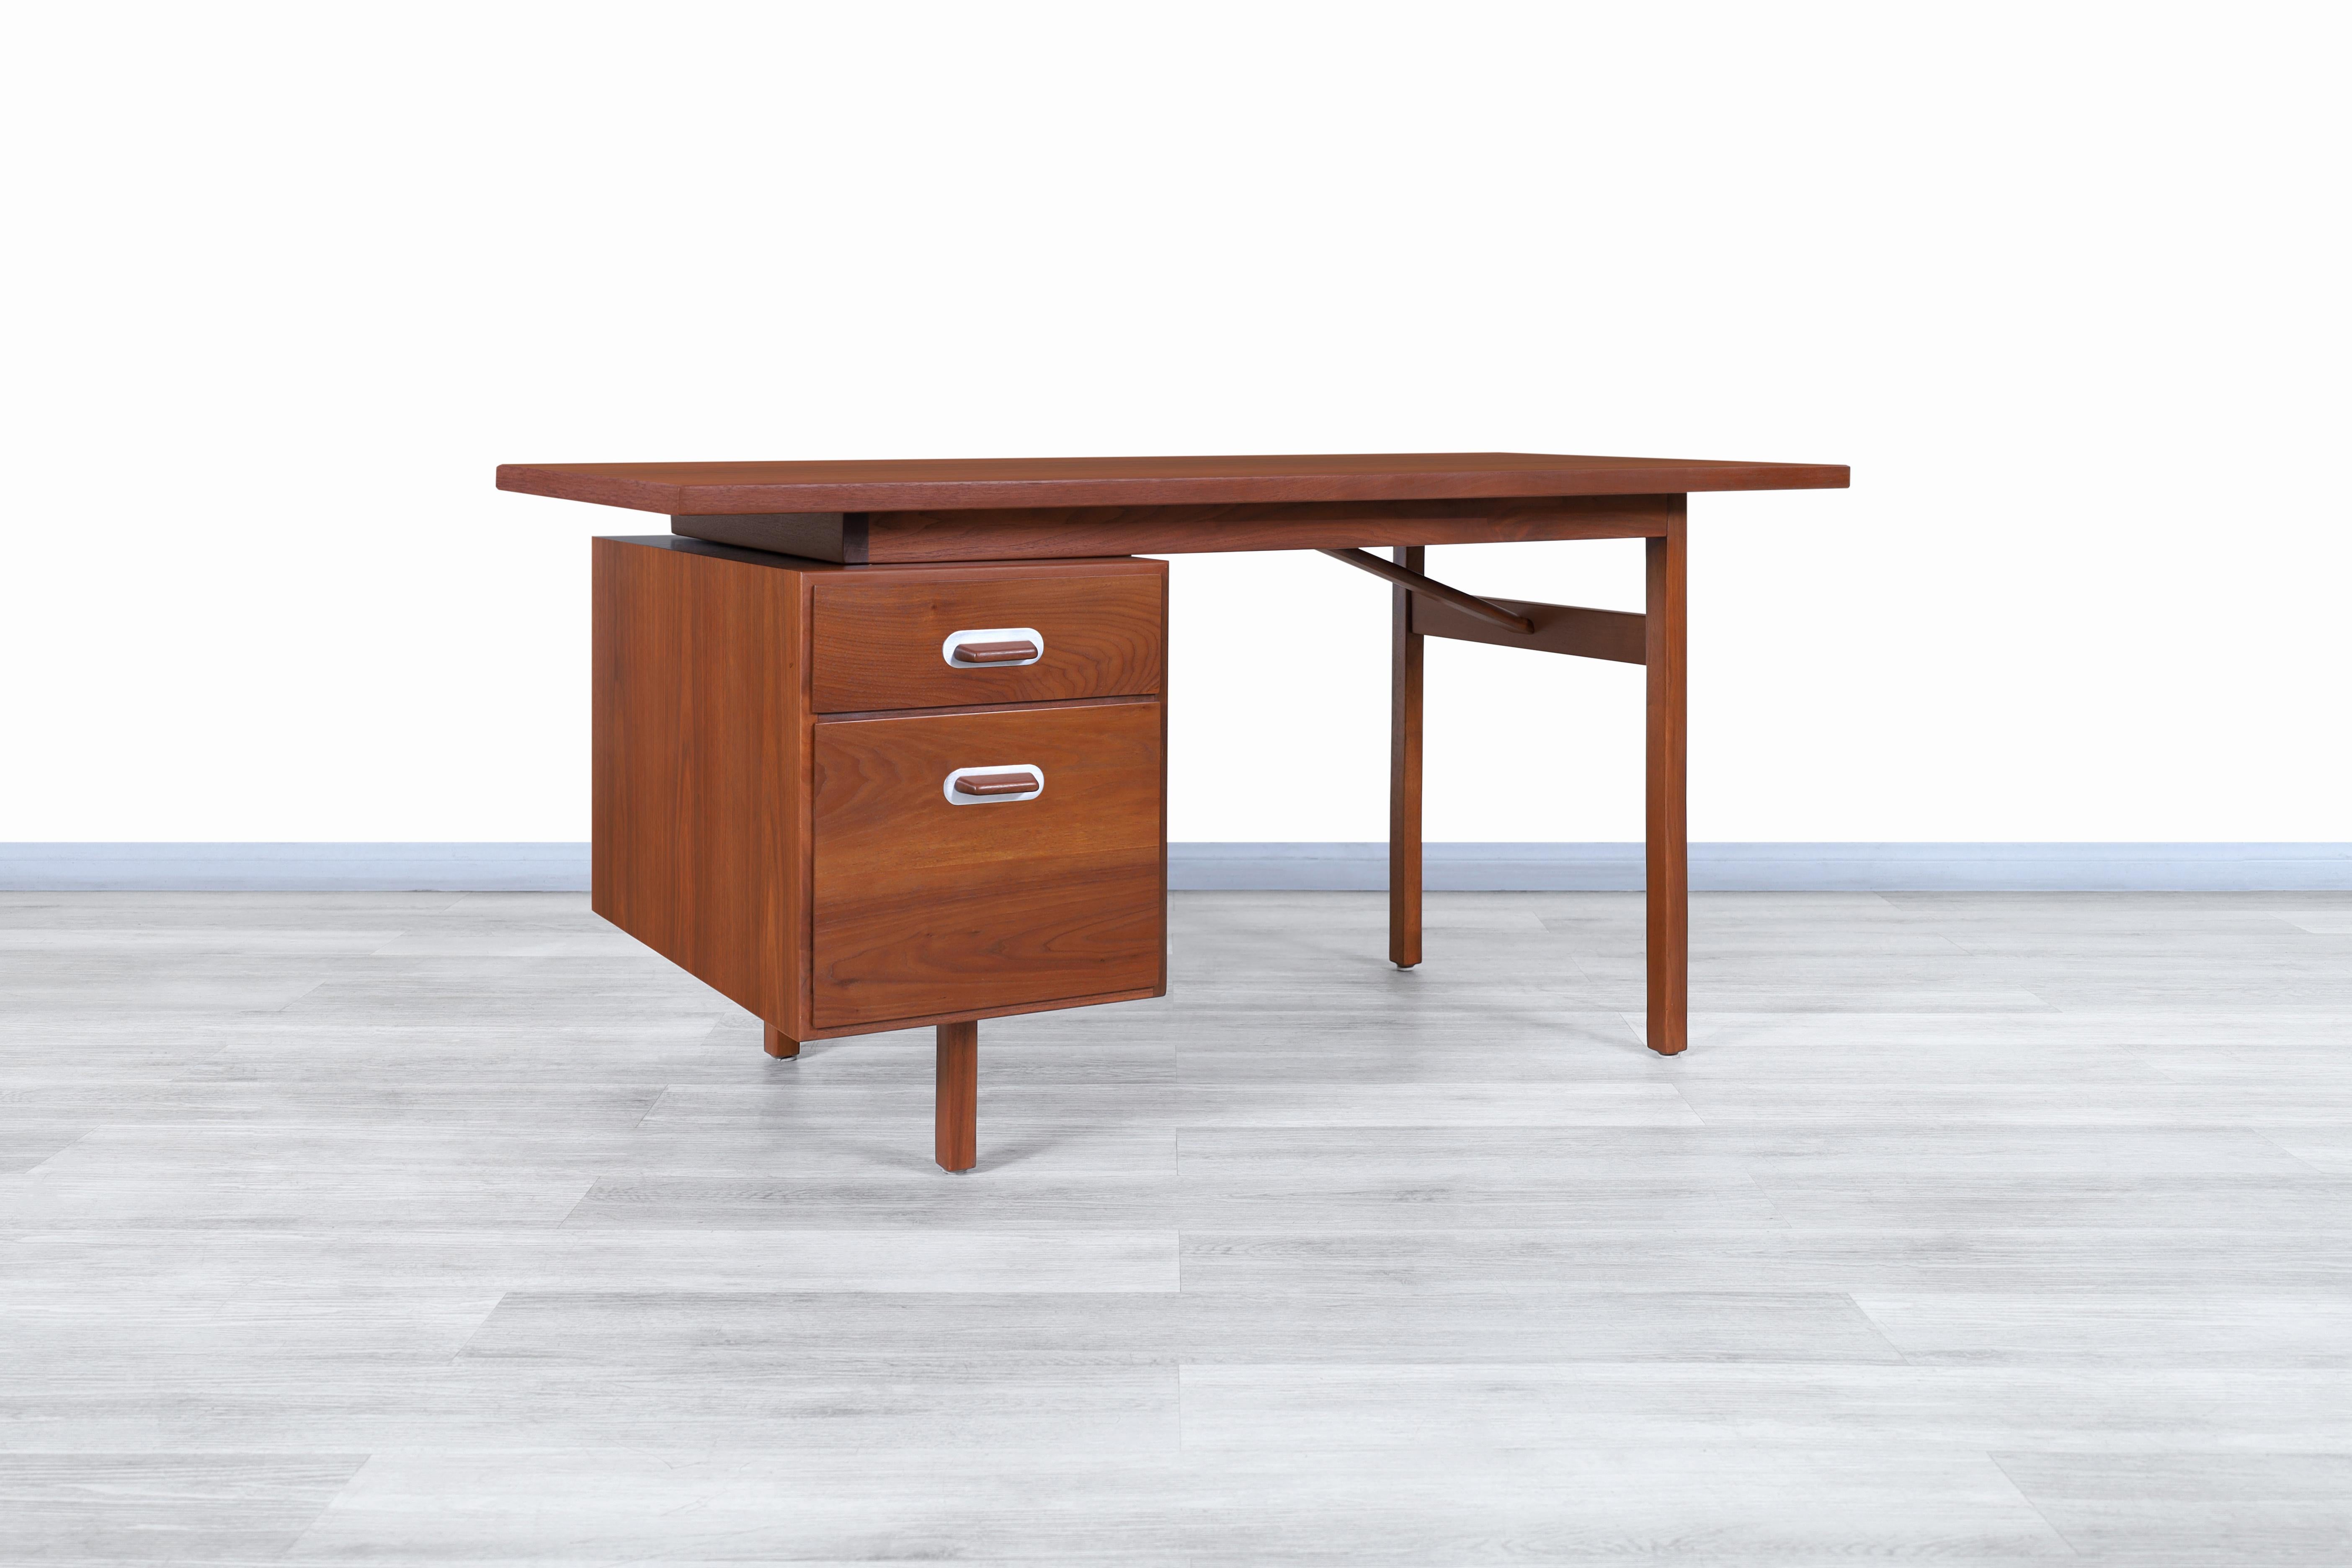 Exceptional Mid-Century Modern walnut writing desk by Jens Risom and manufactured in the United States, circa 1950s. This desk has a conservative design but is highly functional, which stands out thanks to the elegant walnut wood used for its